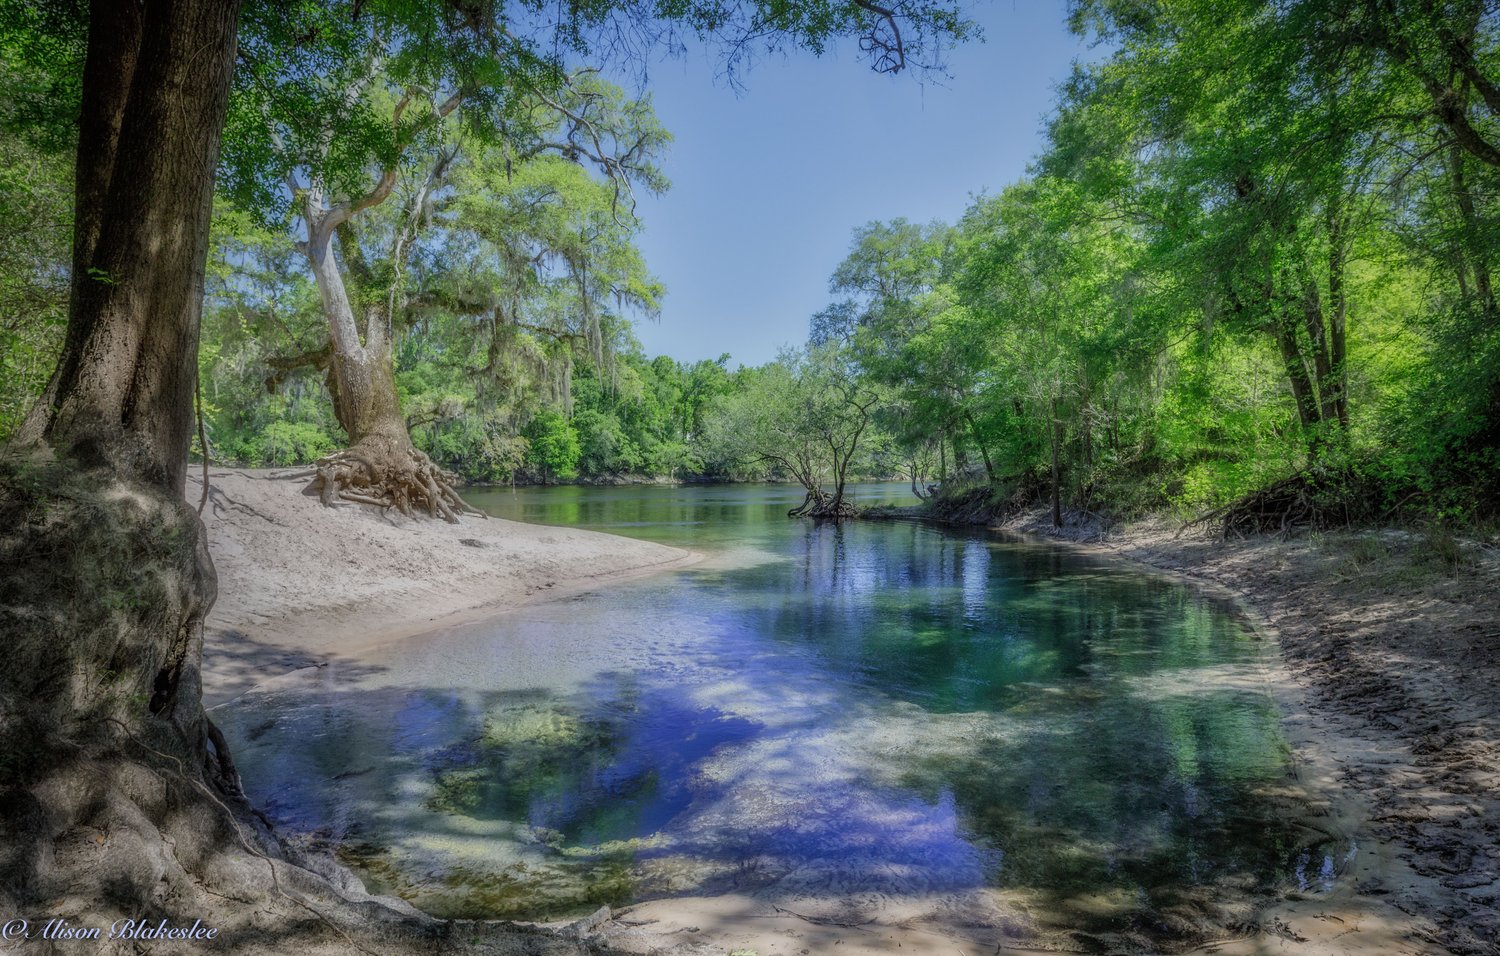 Suwannee River Headwaters Forest – Georgia - The Conservation Fund